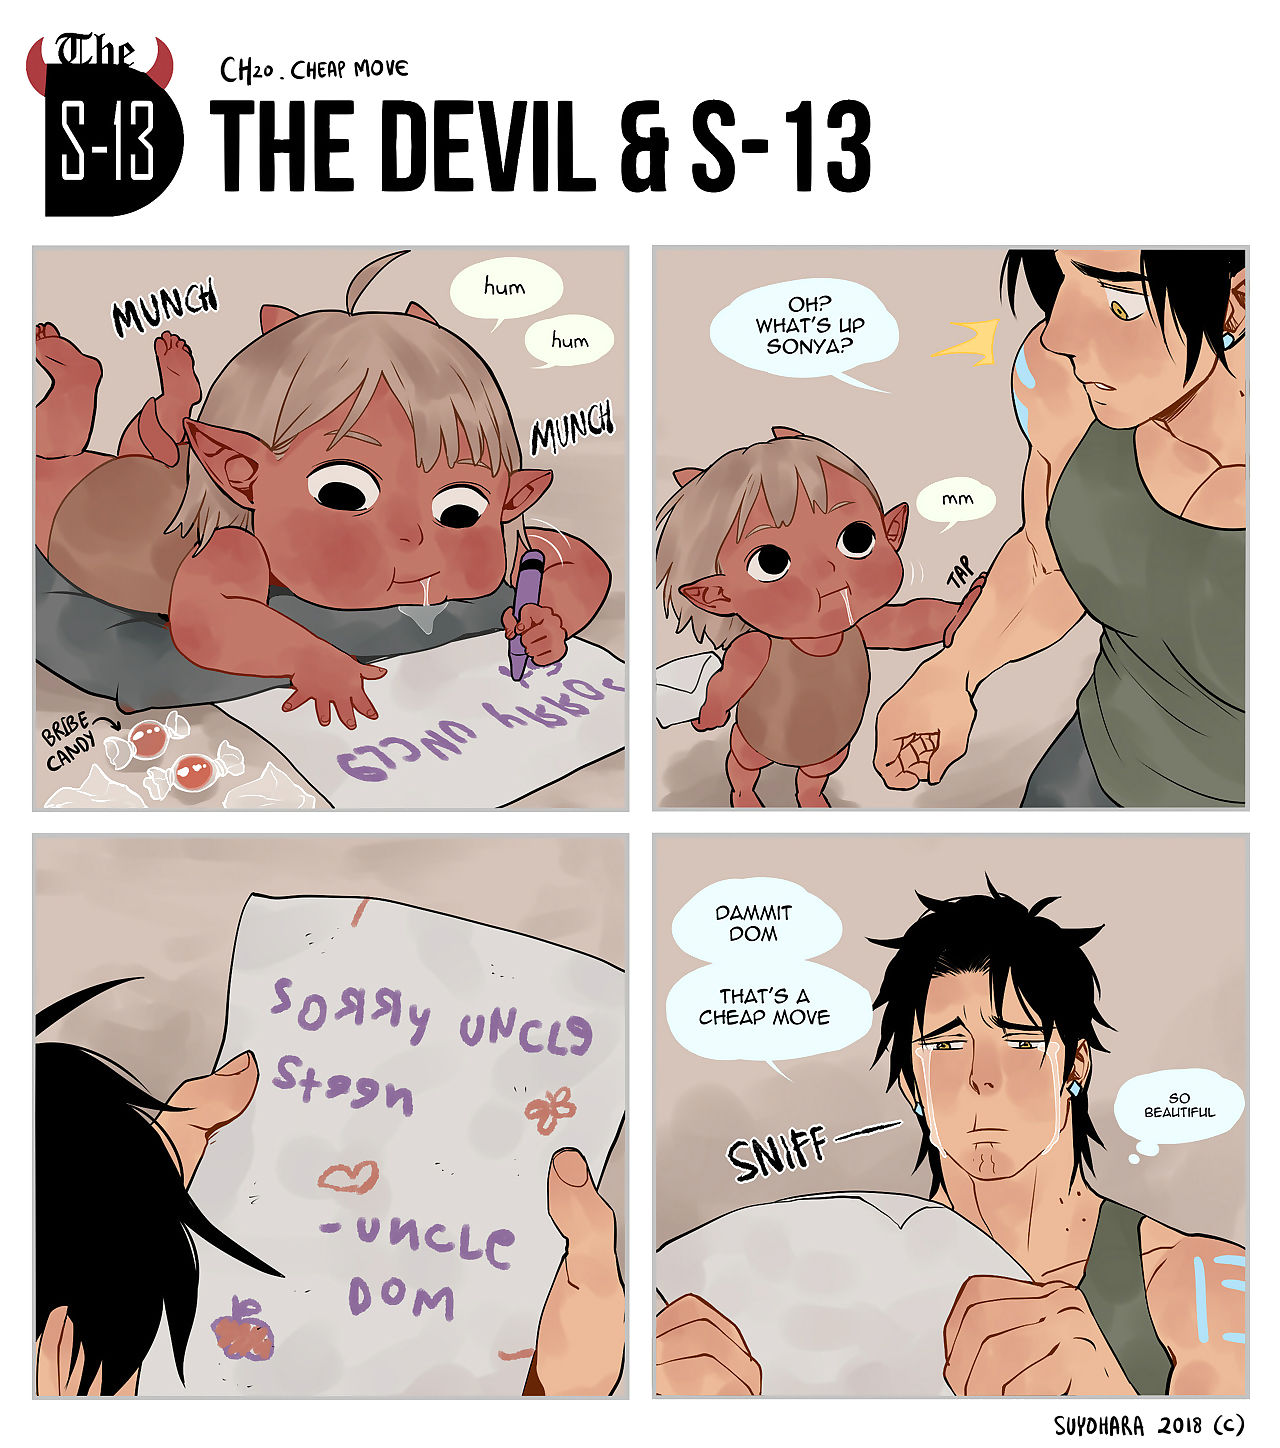 The Devil and S-13 - part 2